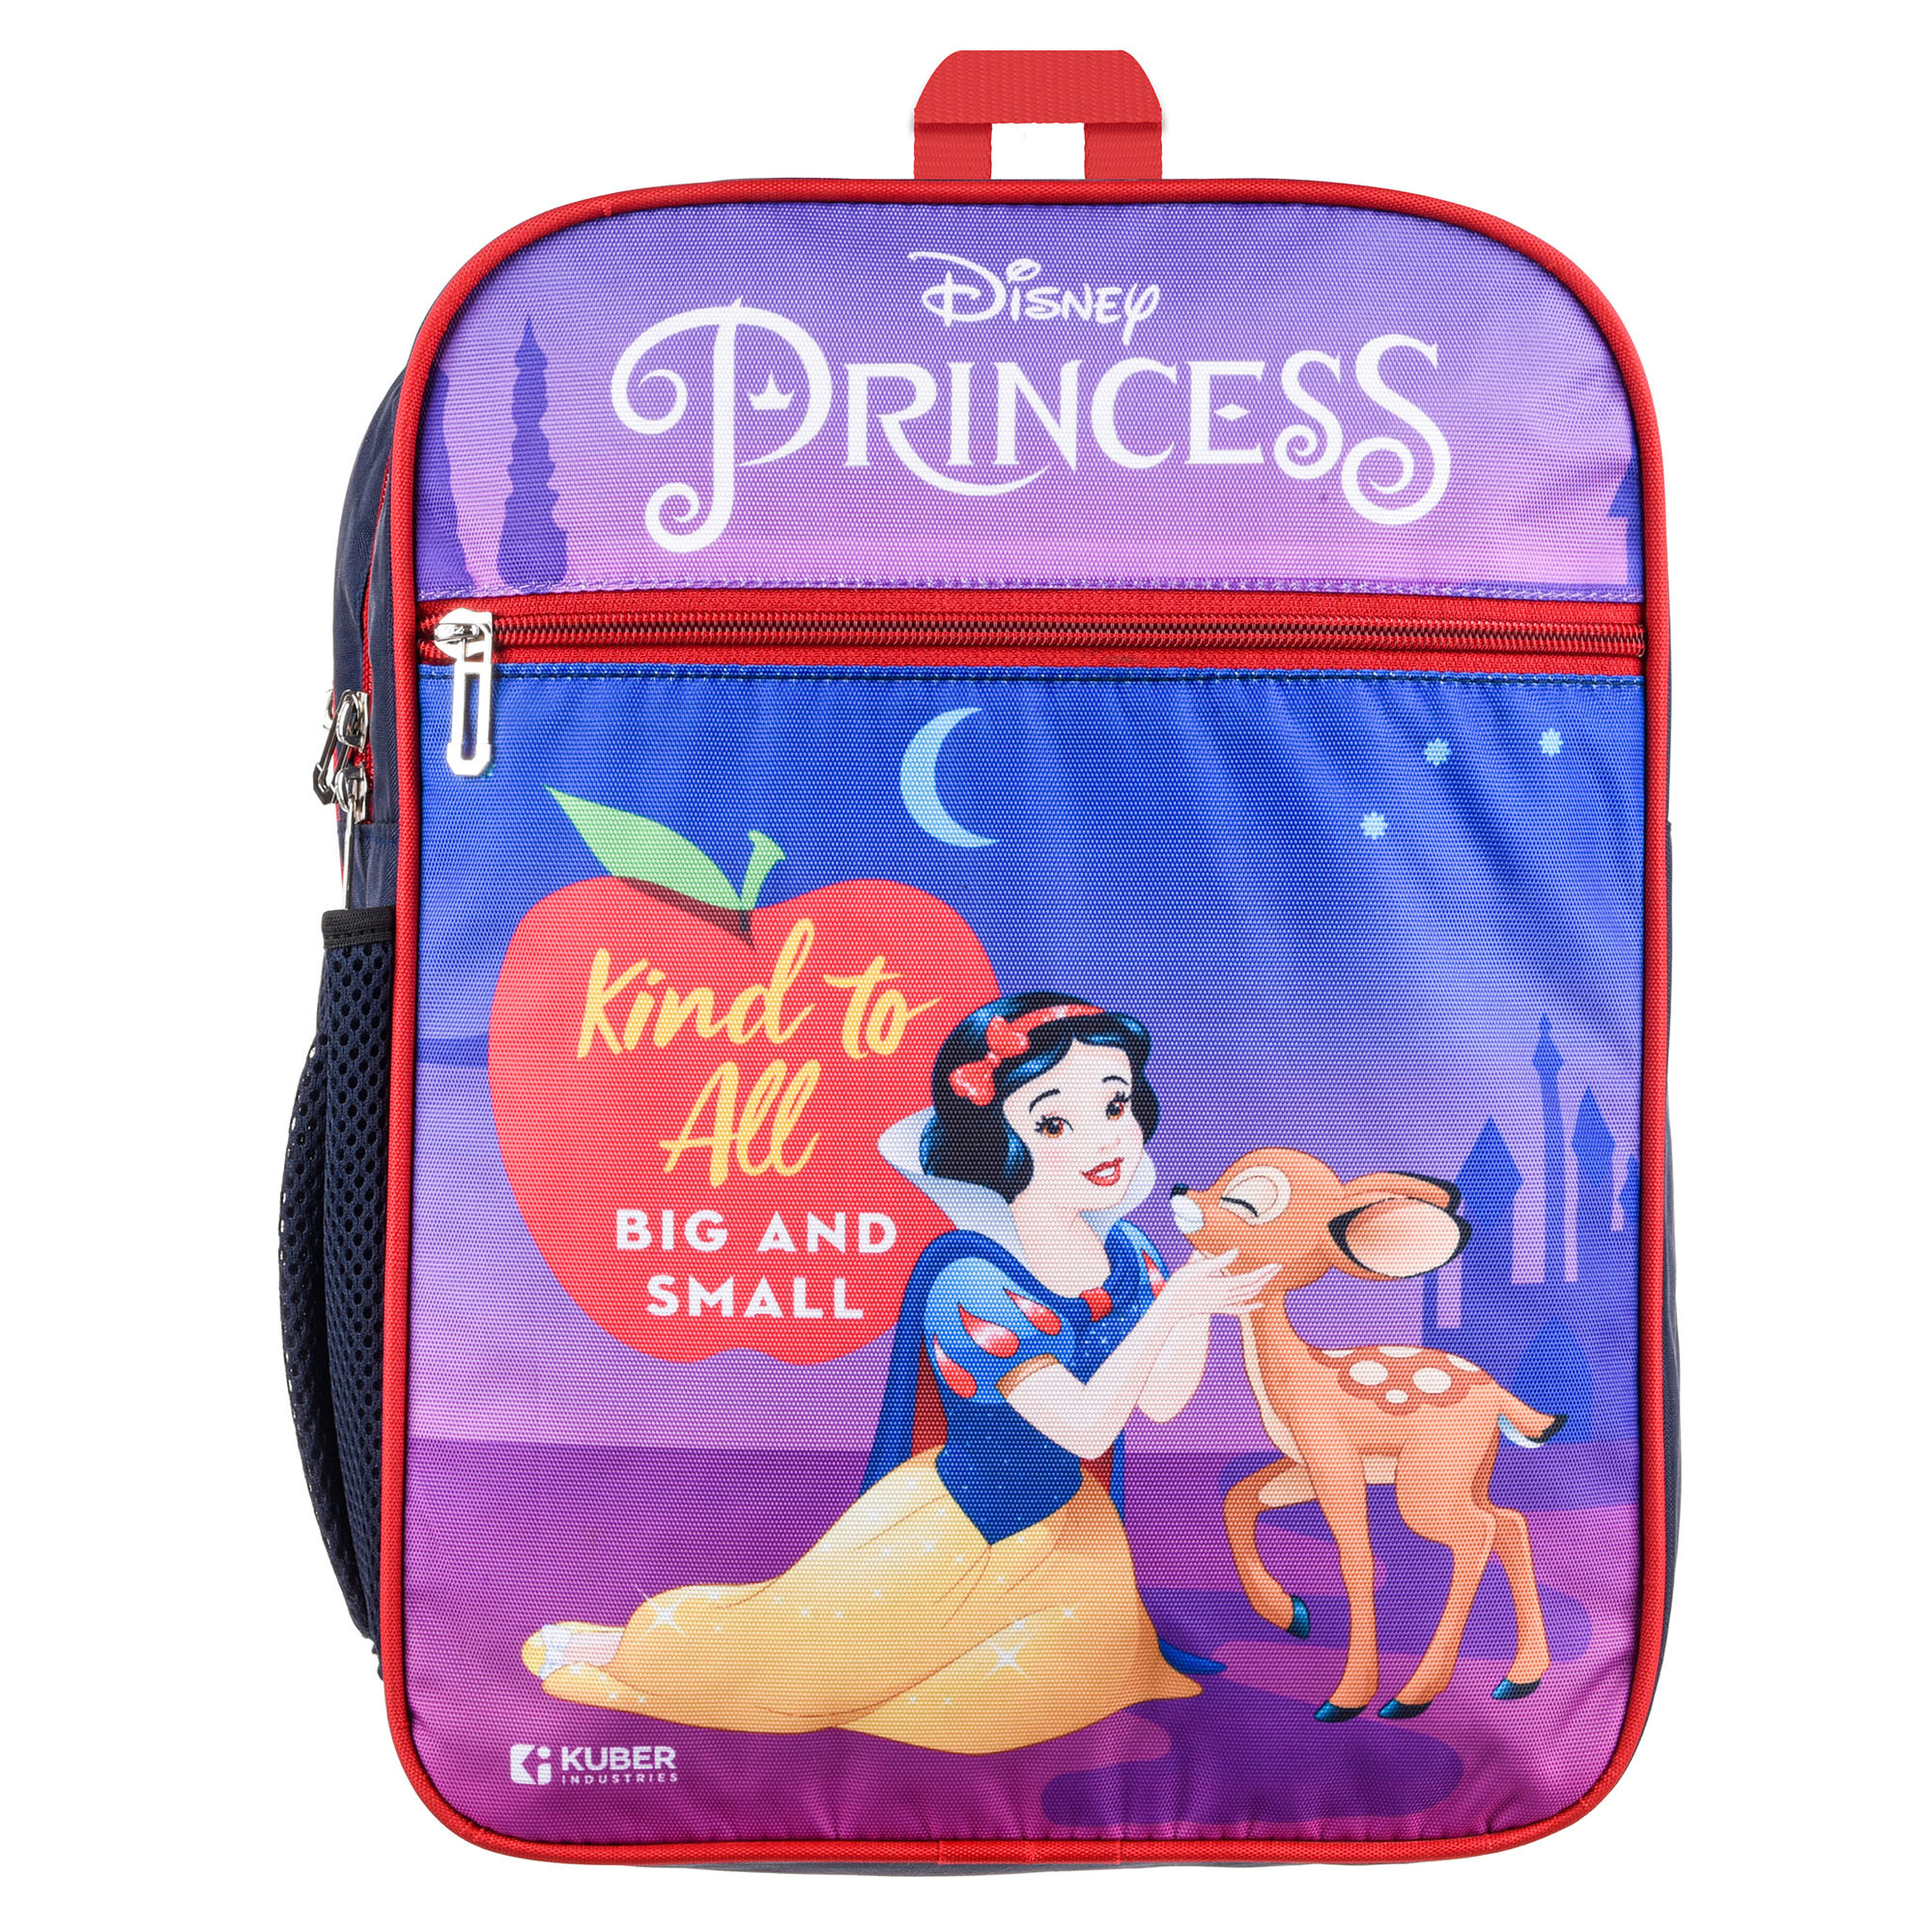 Kuber Industries Disney Princess Kind to All School Bags | Kids School Bags | Student Bookbag | Travel Backpack | School Bag for Girls & Boys | School Bag with 3 Compartments | Purple